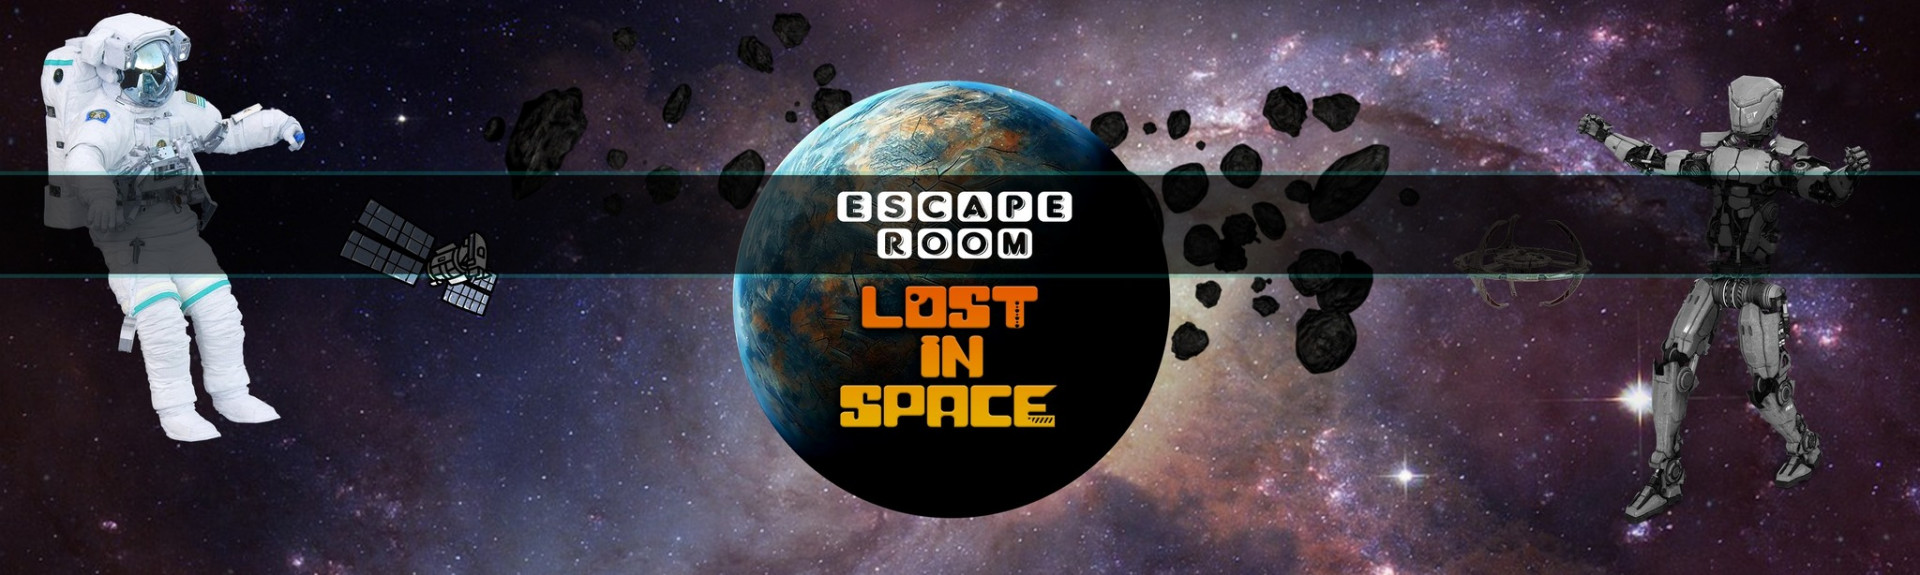 Escape Room - Lost in Space